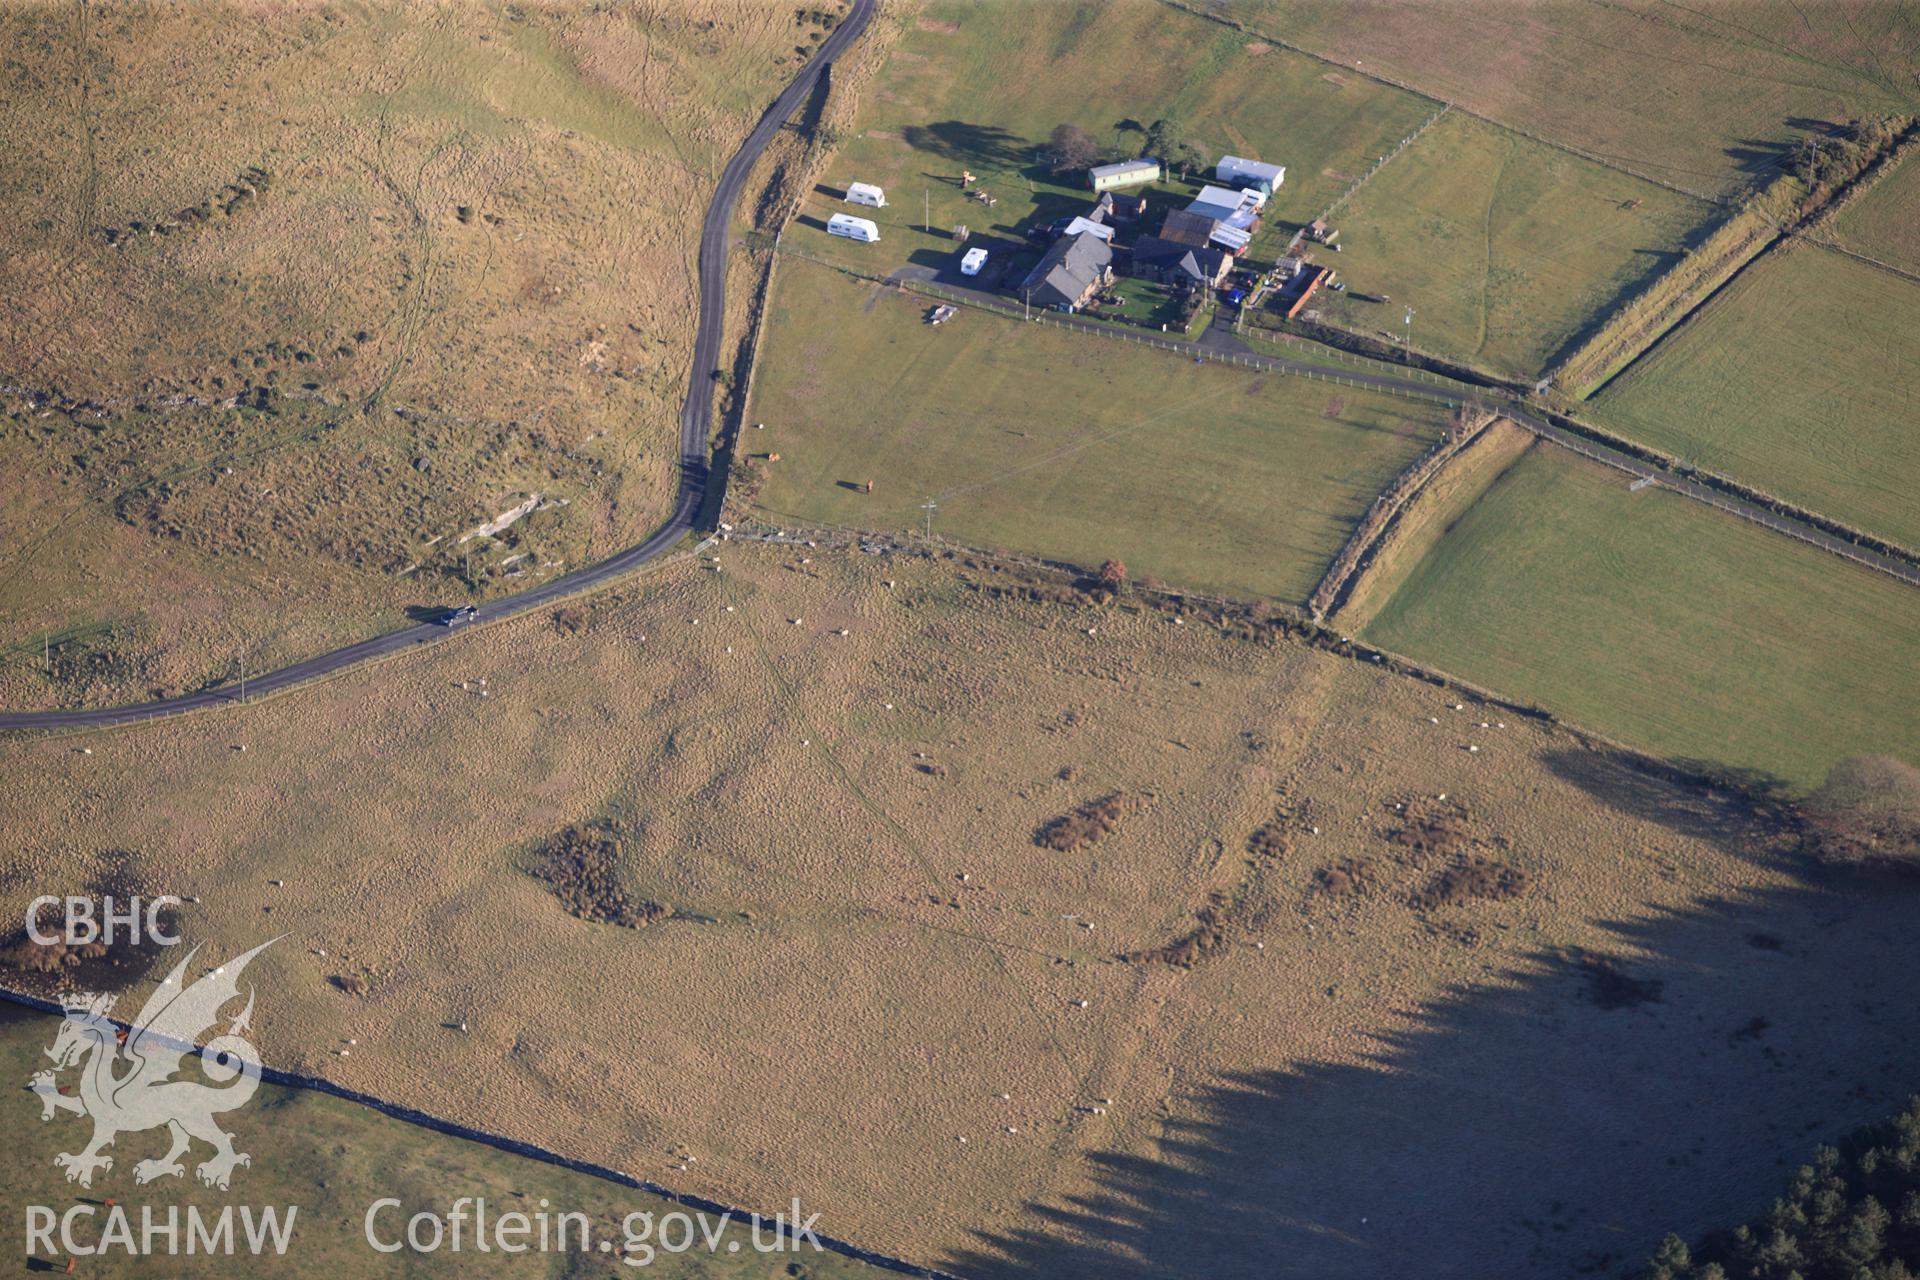 RCAHMW colour oblique photograph of Tanforhesgan earthwork enclosure. Taken by Toby Driver on 10/12/2012.